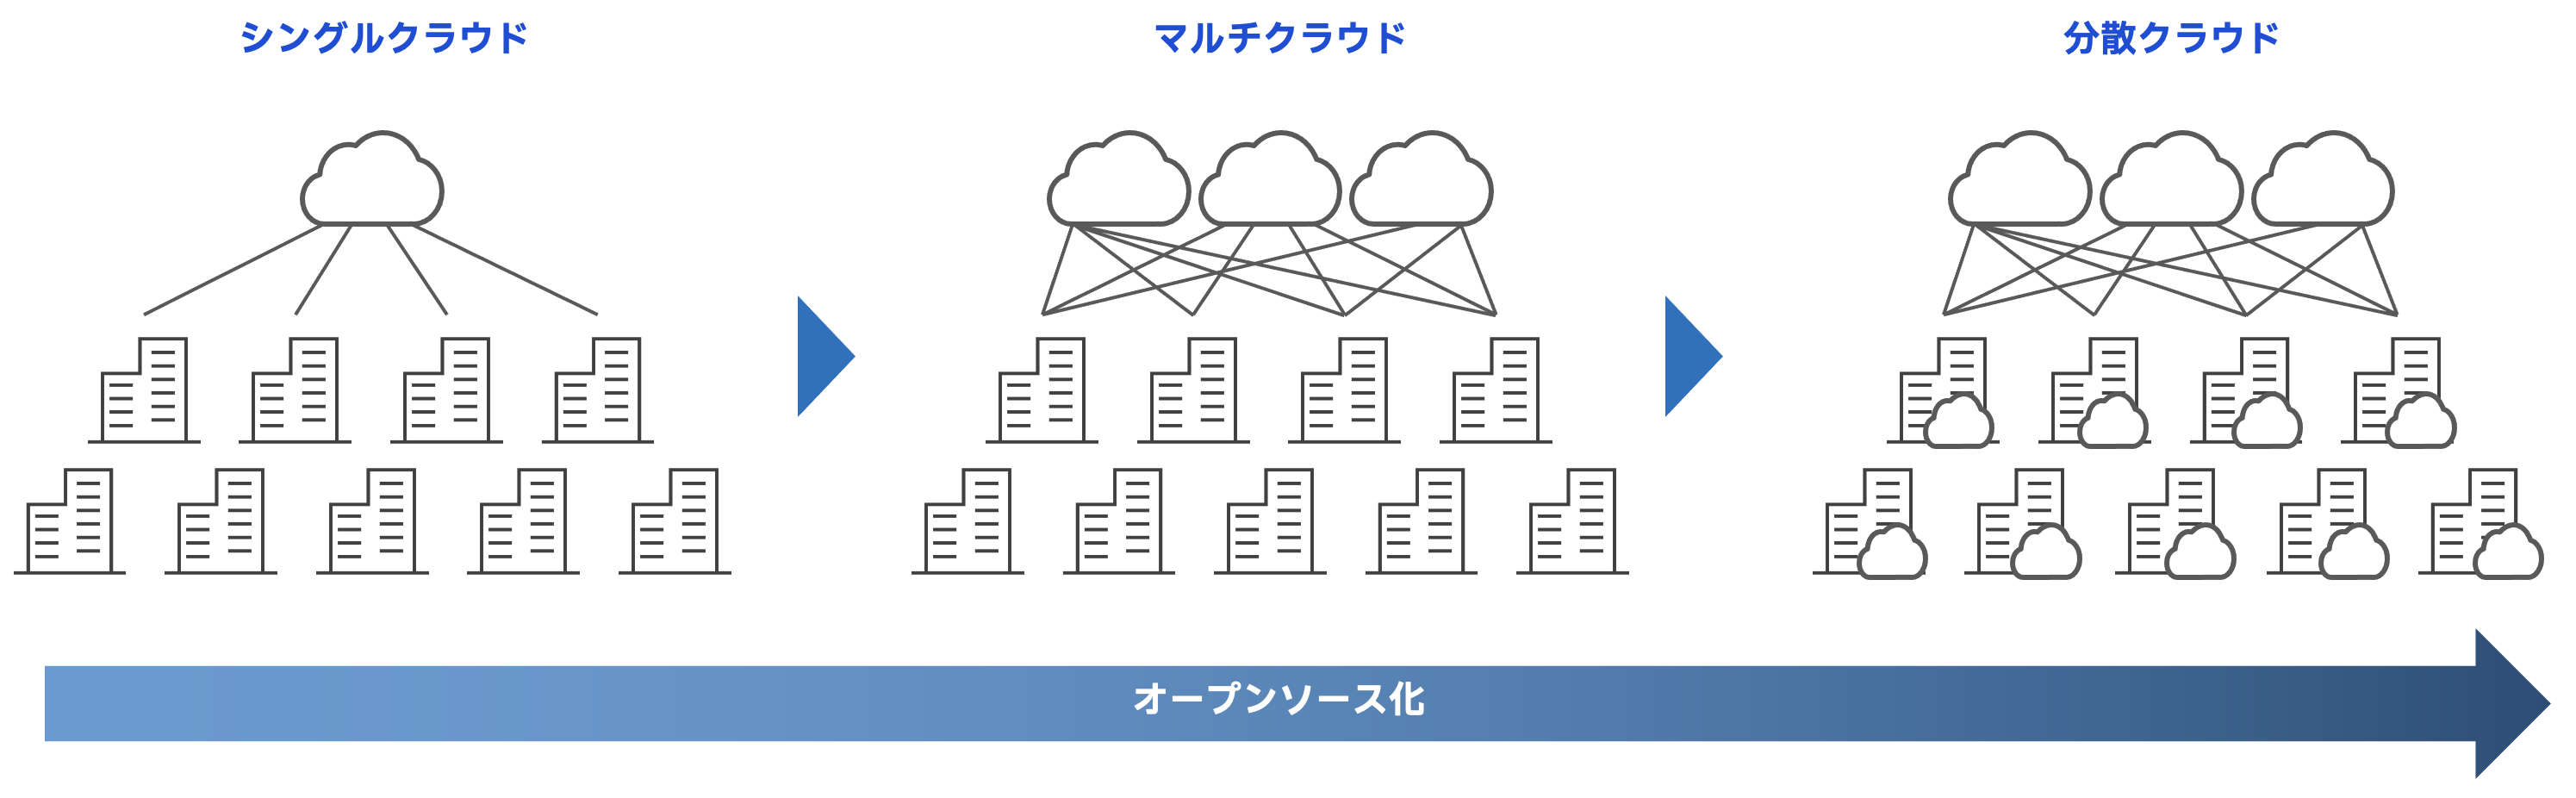 The Distributed Cloud